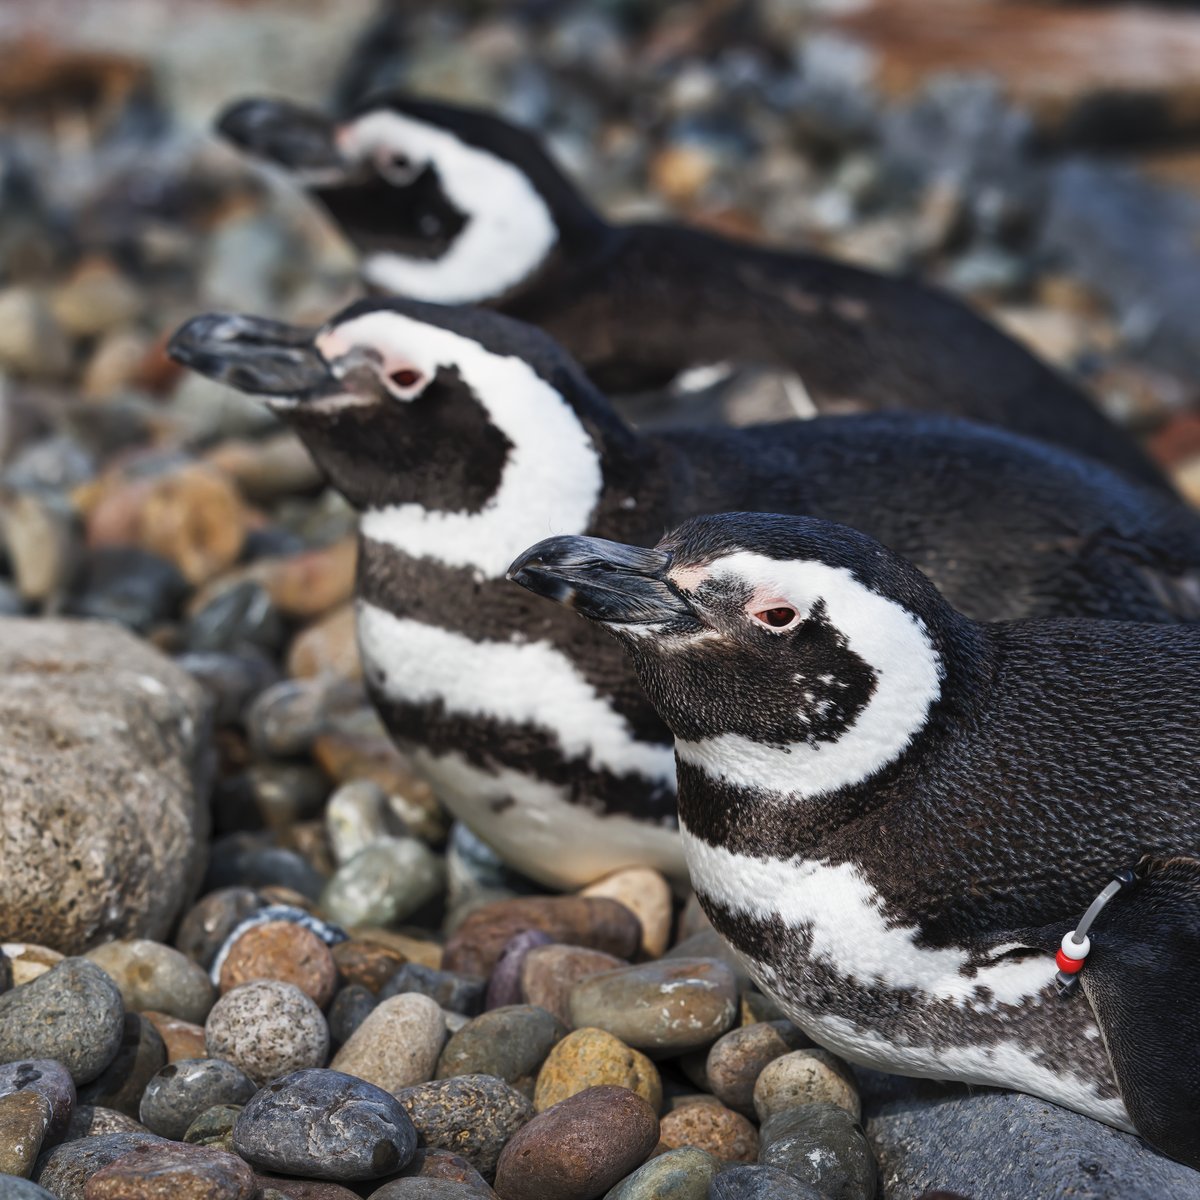 Join us for a Penguin Beach @exploreorg webcam Q&A chat on Wednesday, April 3, at 2PM PT! You can submit your questions here or in the camera comments. Chat soon! pacific.to/penguincam